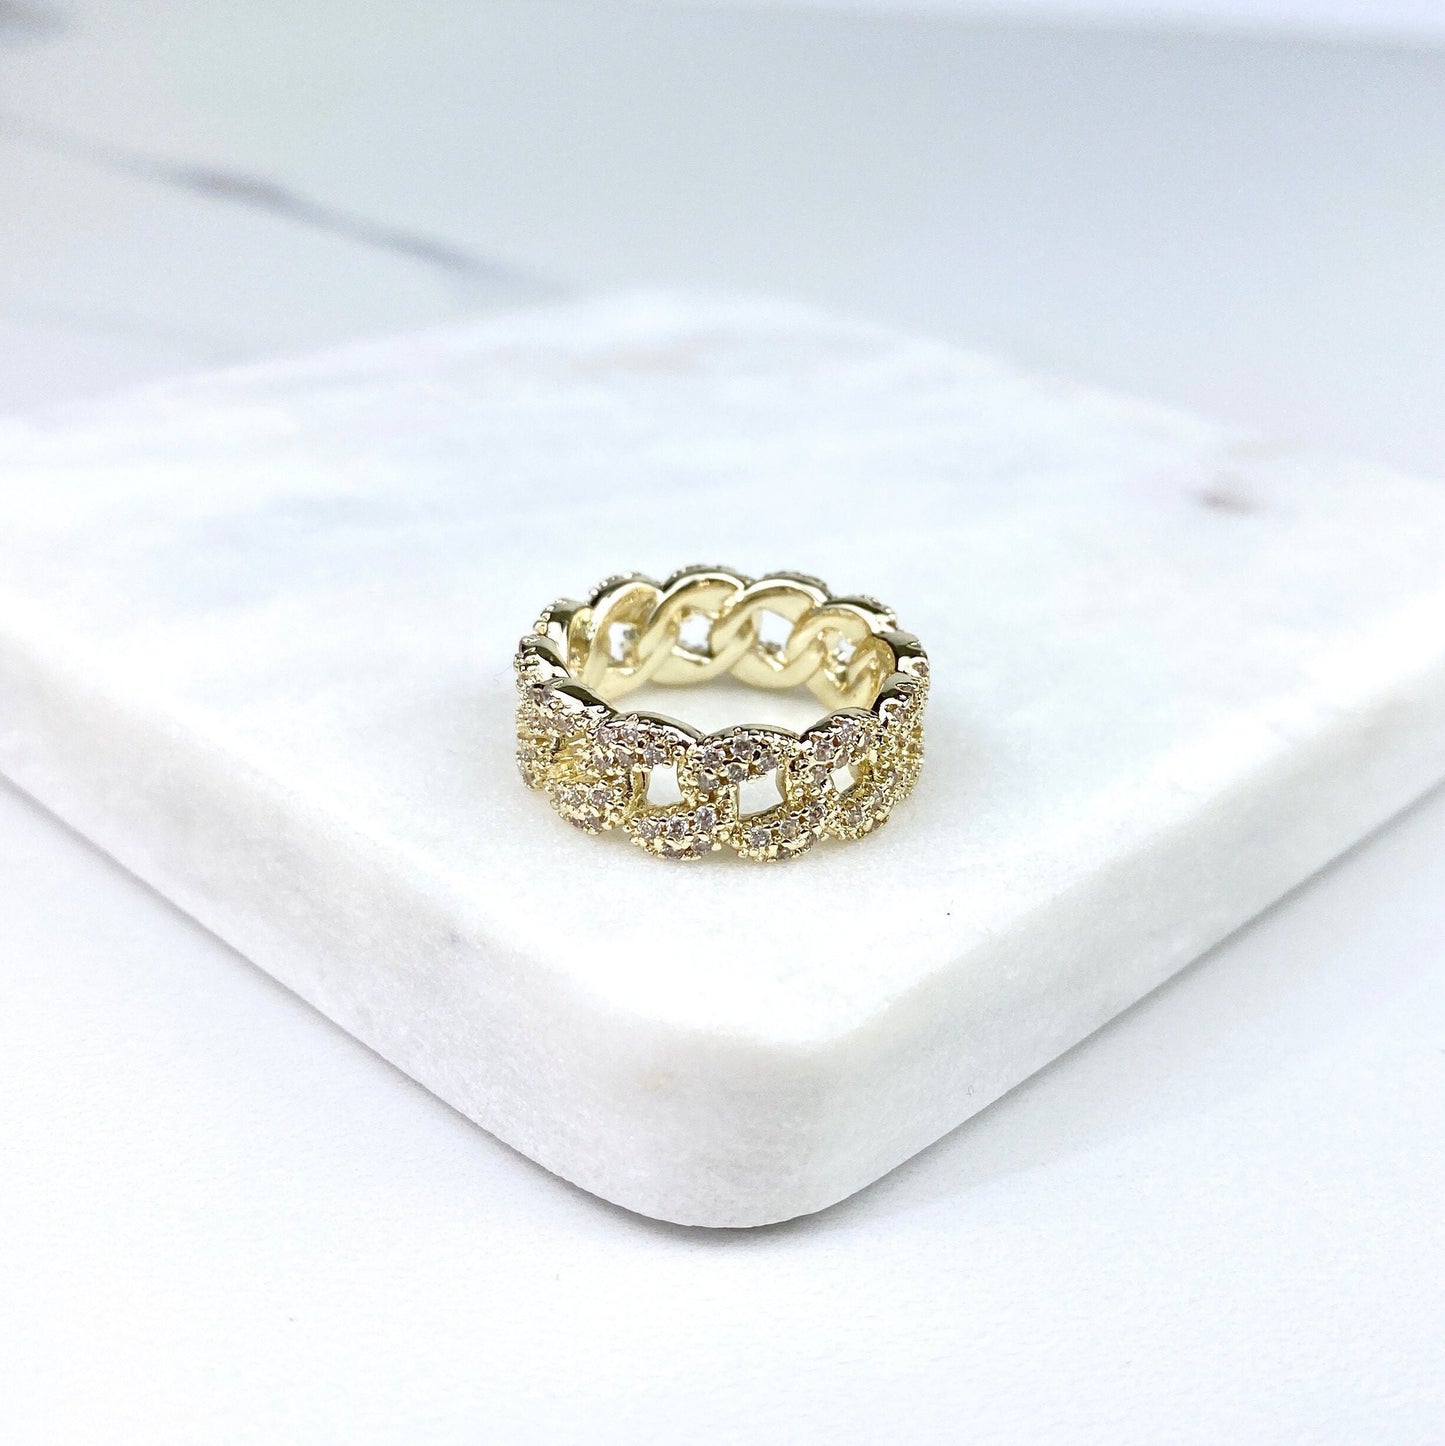 18k Gold Filled Micro Pave Cubic Zirconia Curb Link Ring, Gold or Silver, Wholesale Jewelry Making Supplies